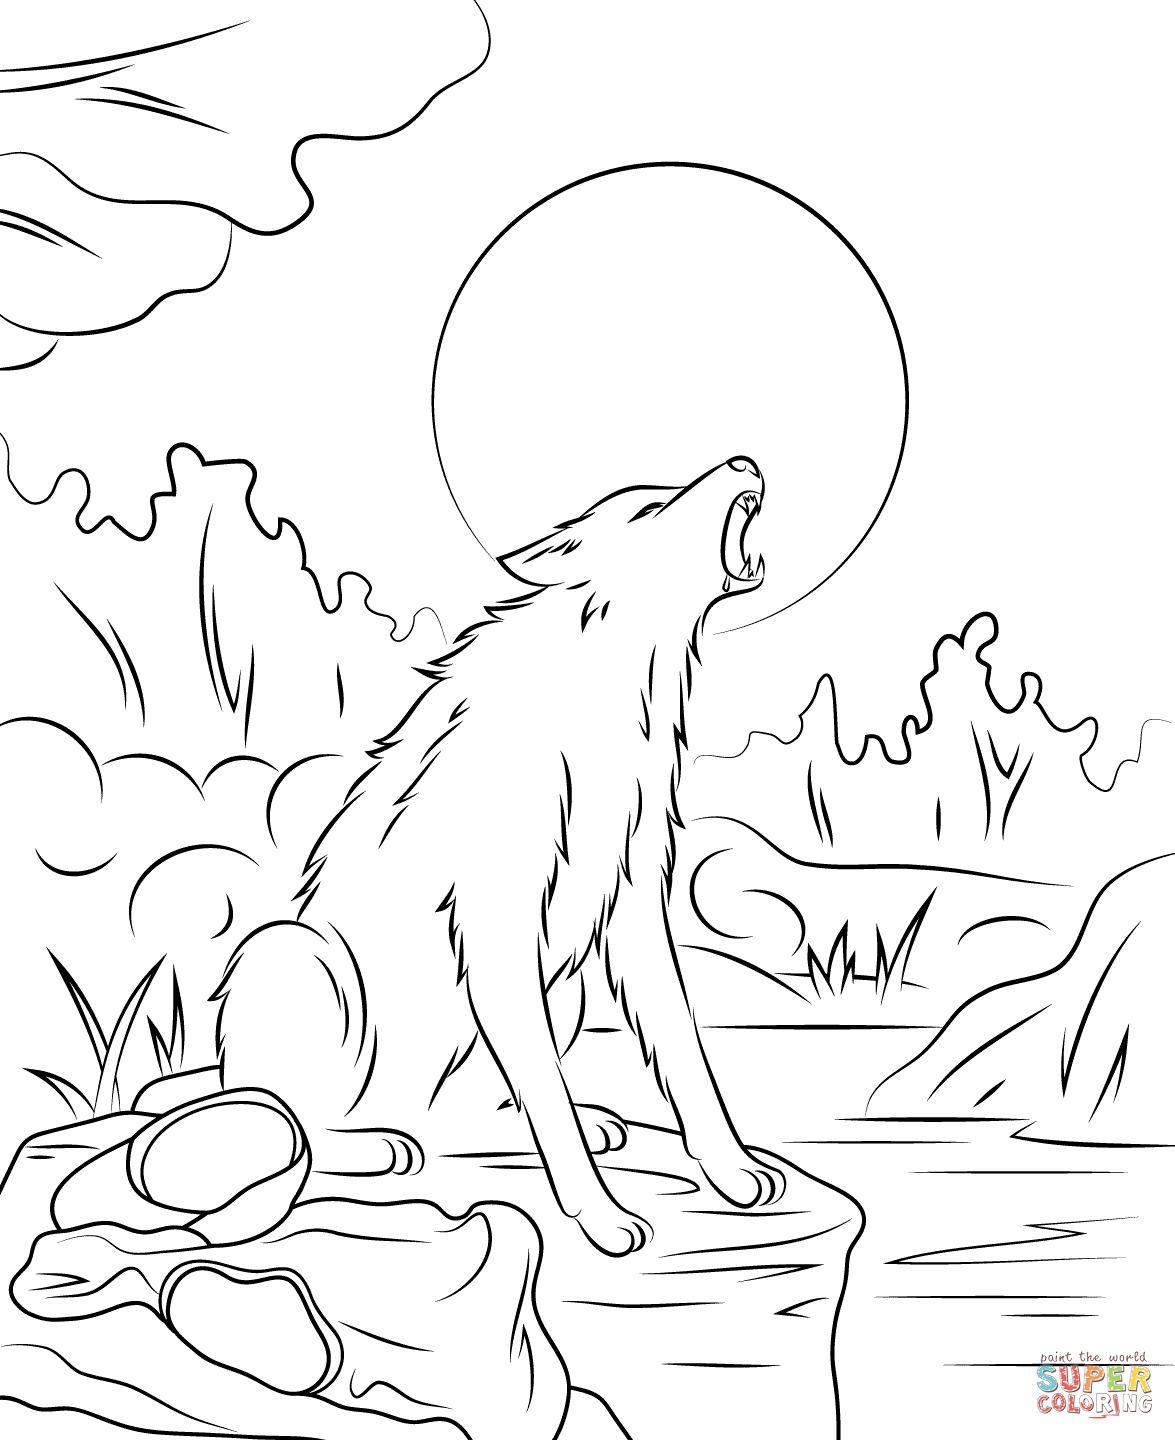 Goosebump - The Werewolf coloring page | Free Printable Coloring Pages